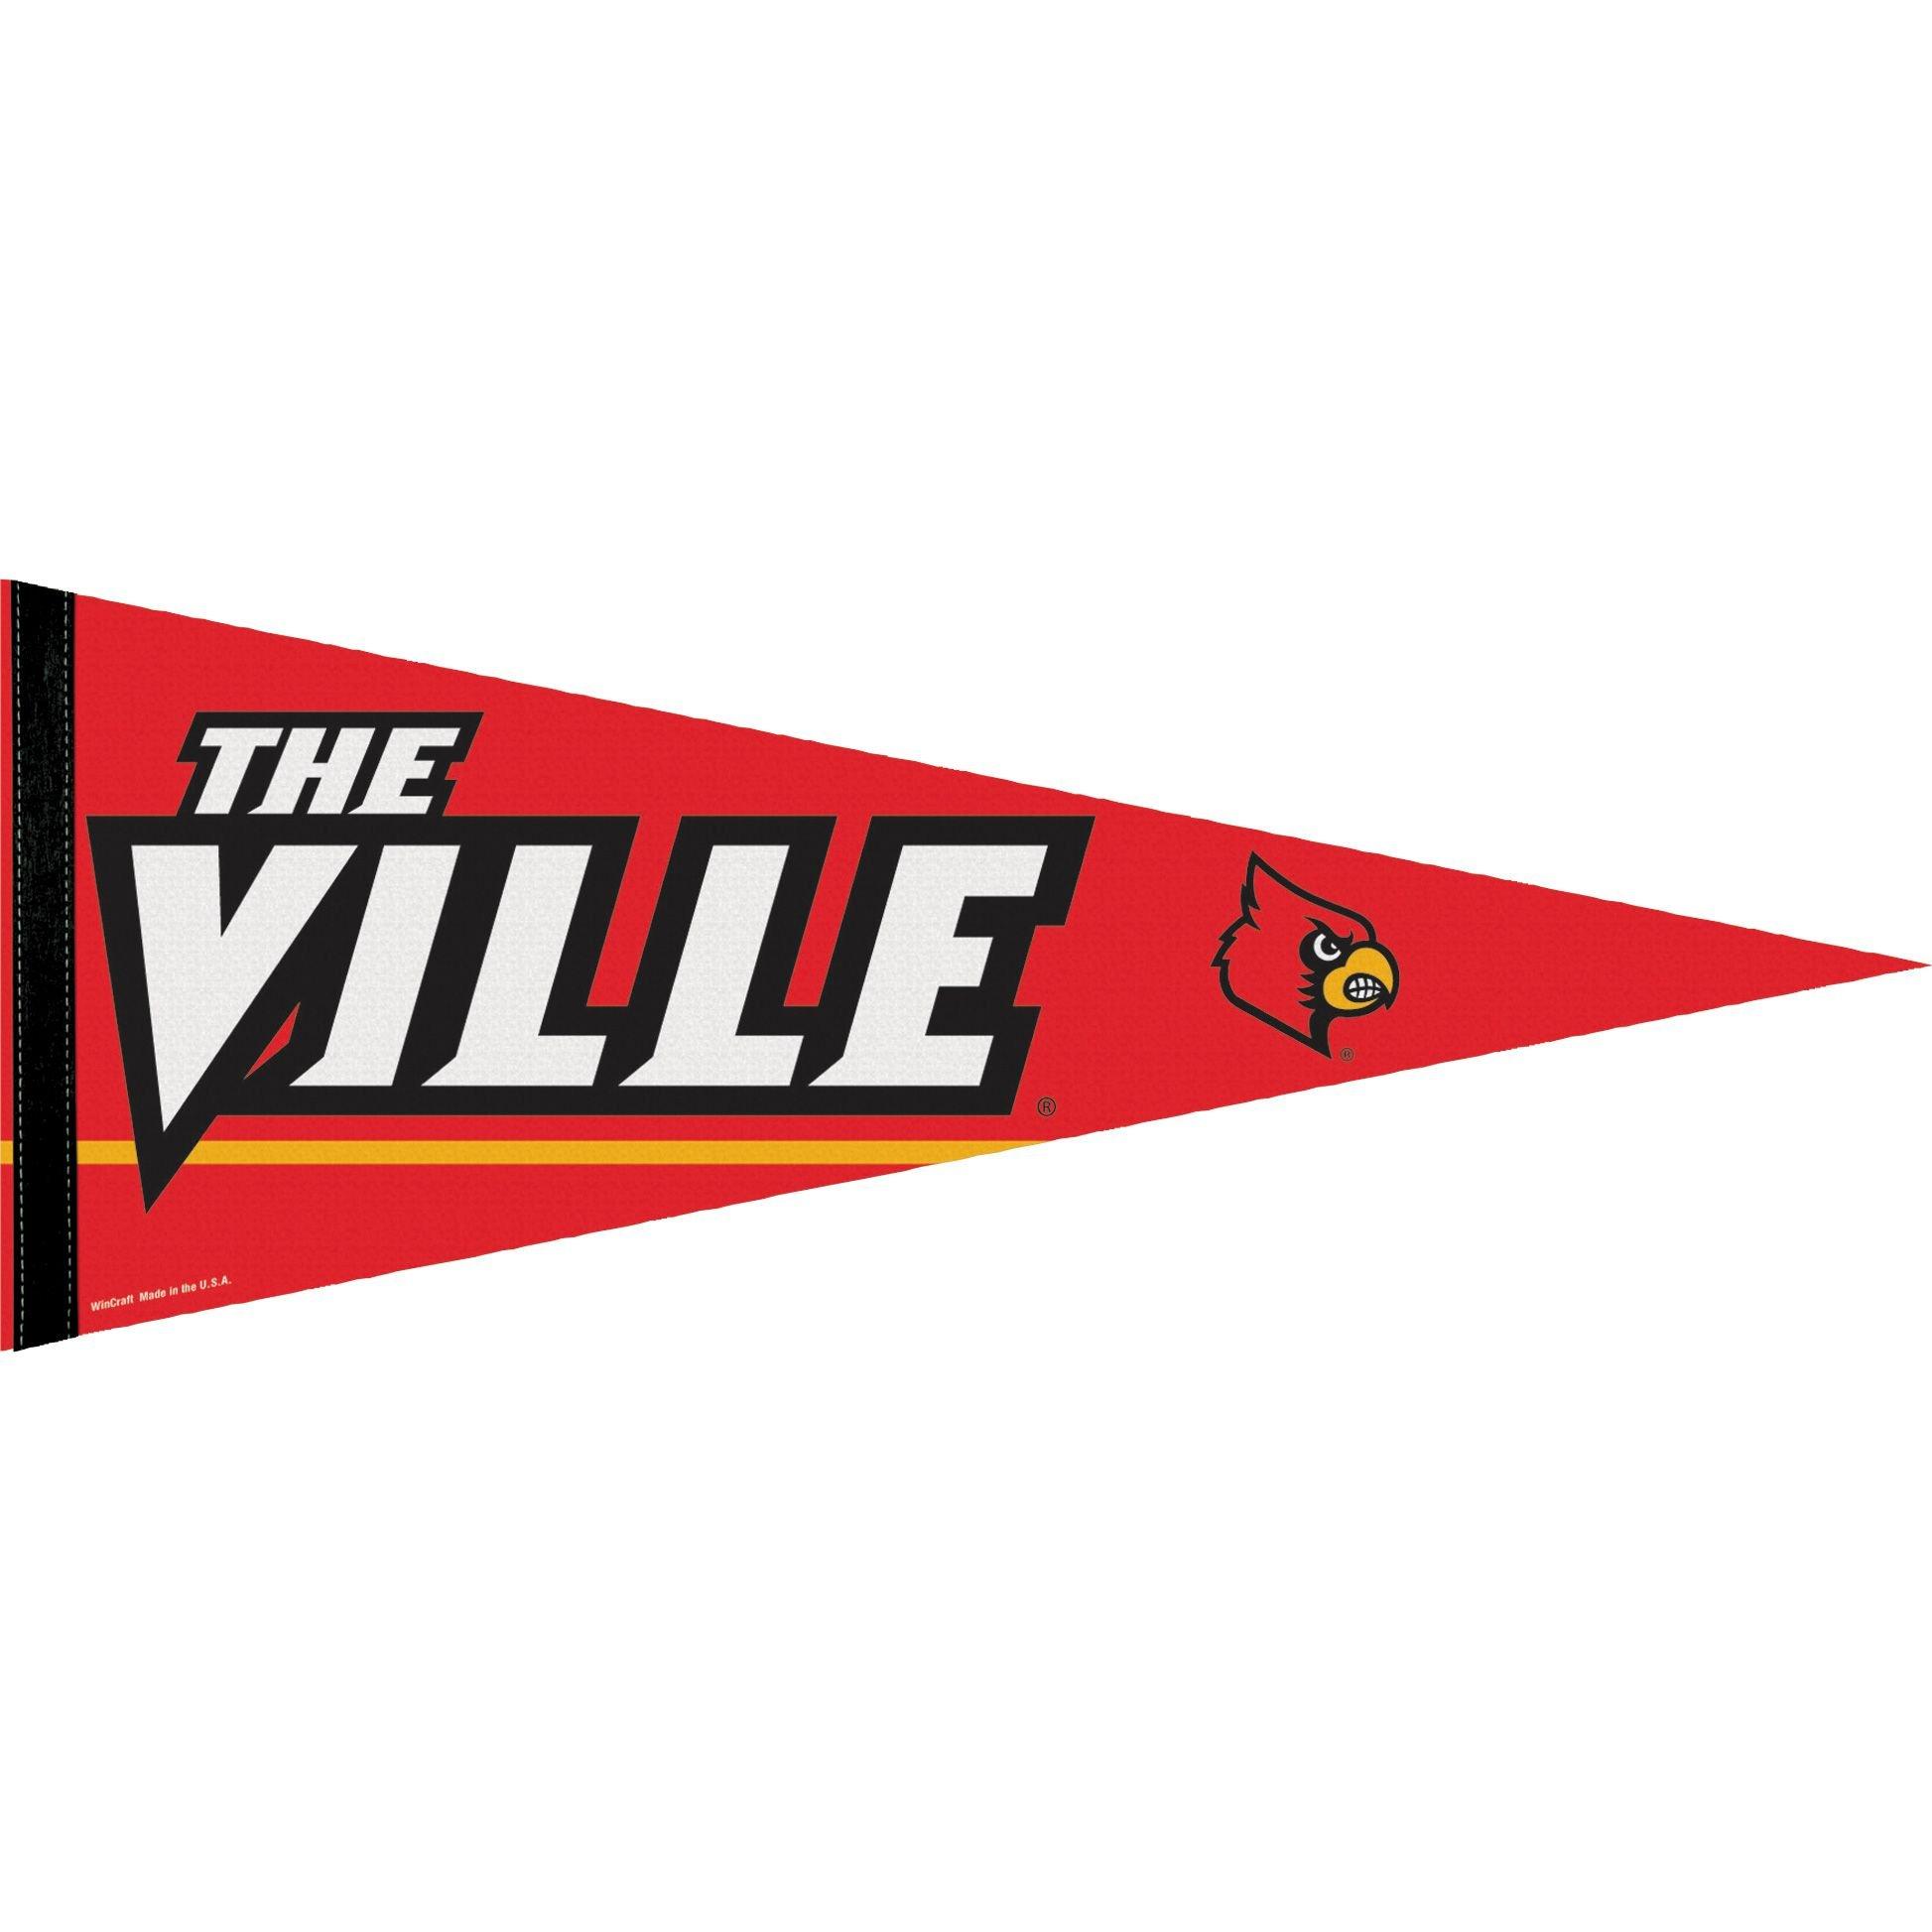 Louisville Cardinals Party Pack